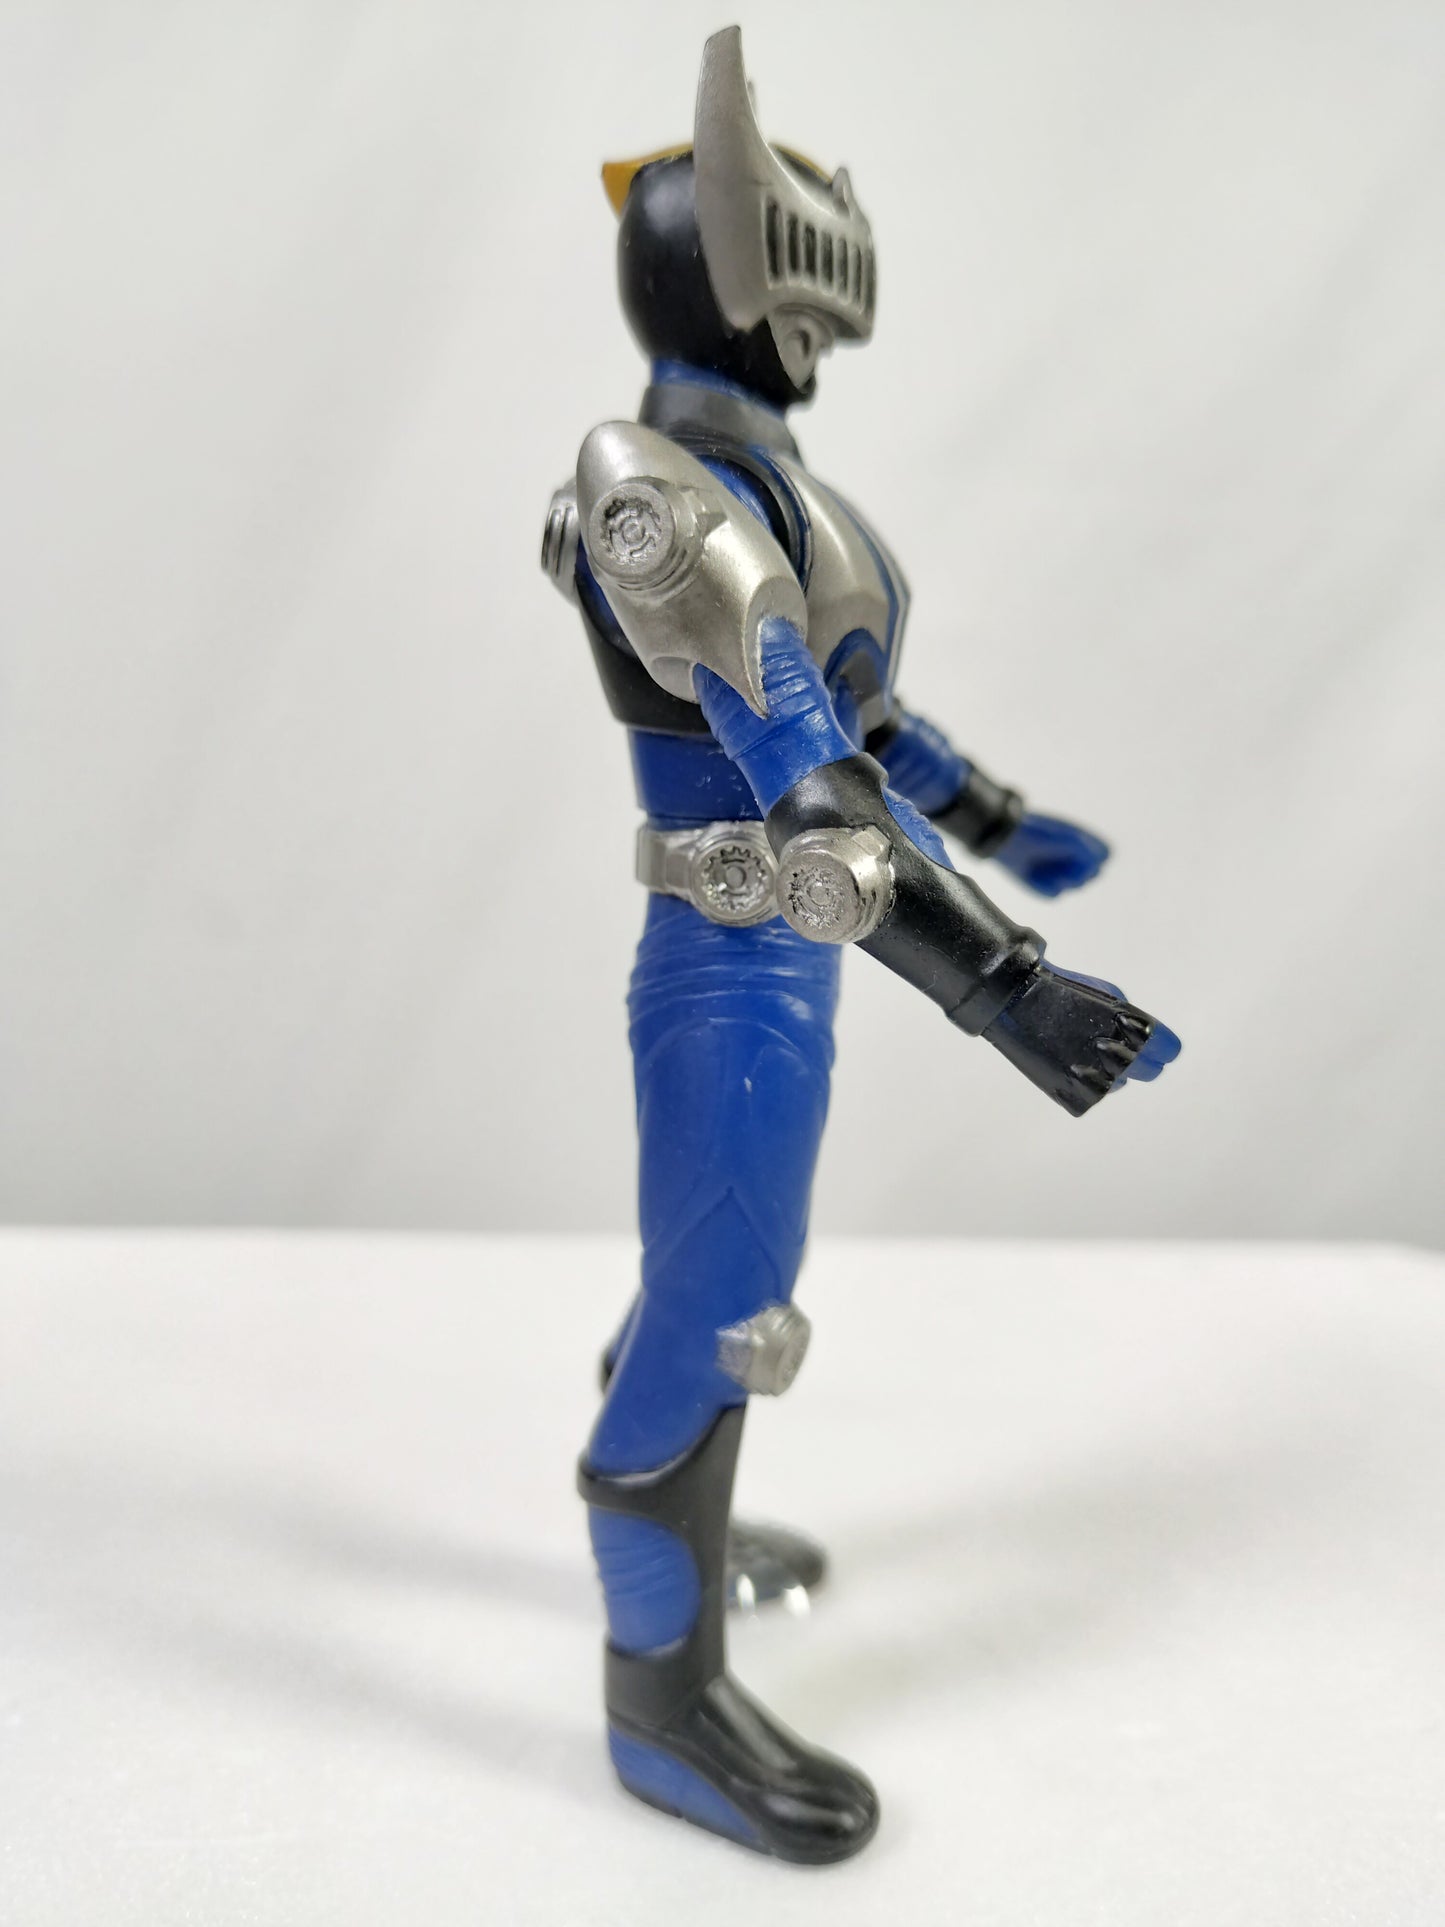 Kamen Rider Knight Mask Rider Made in China Height about 13.5cm Manufactured in 2002 Sofvi Figure retro vintage major scratches and dirt